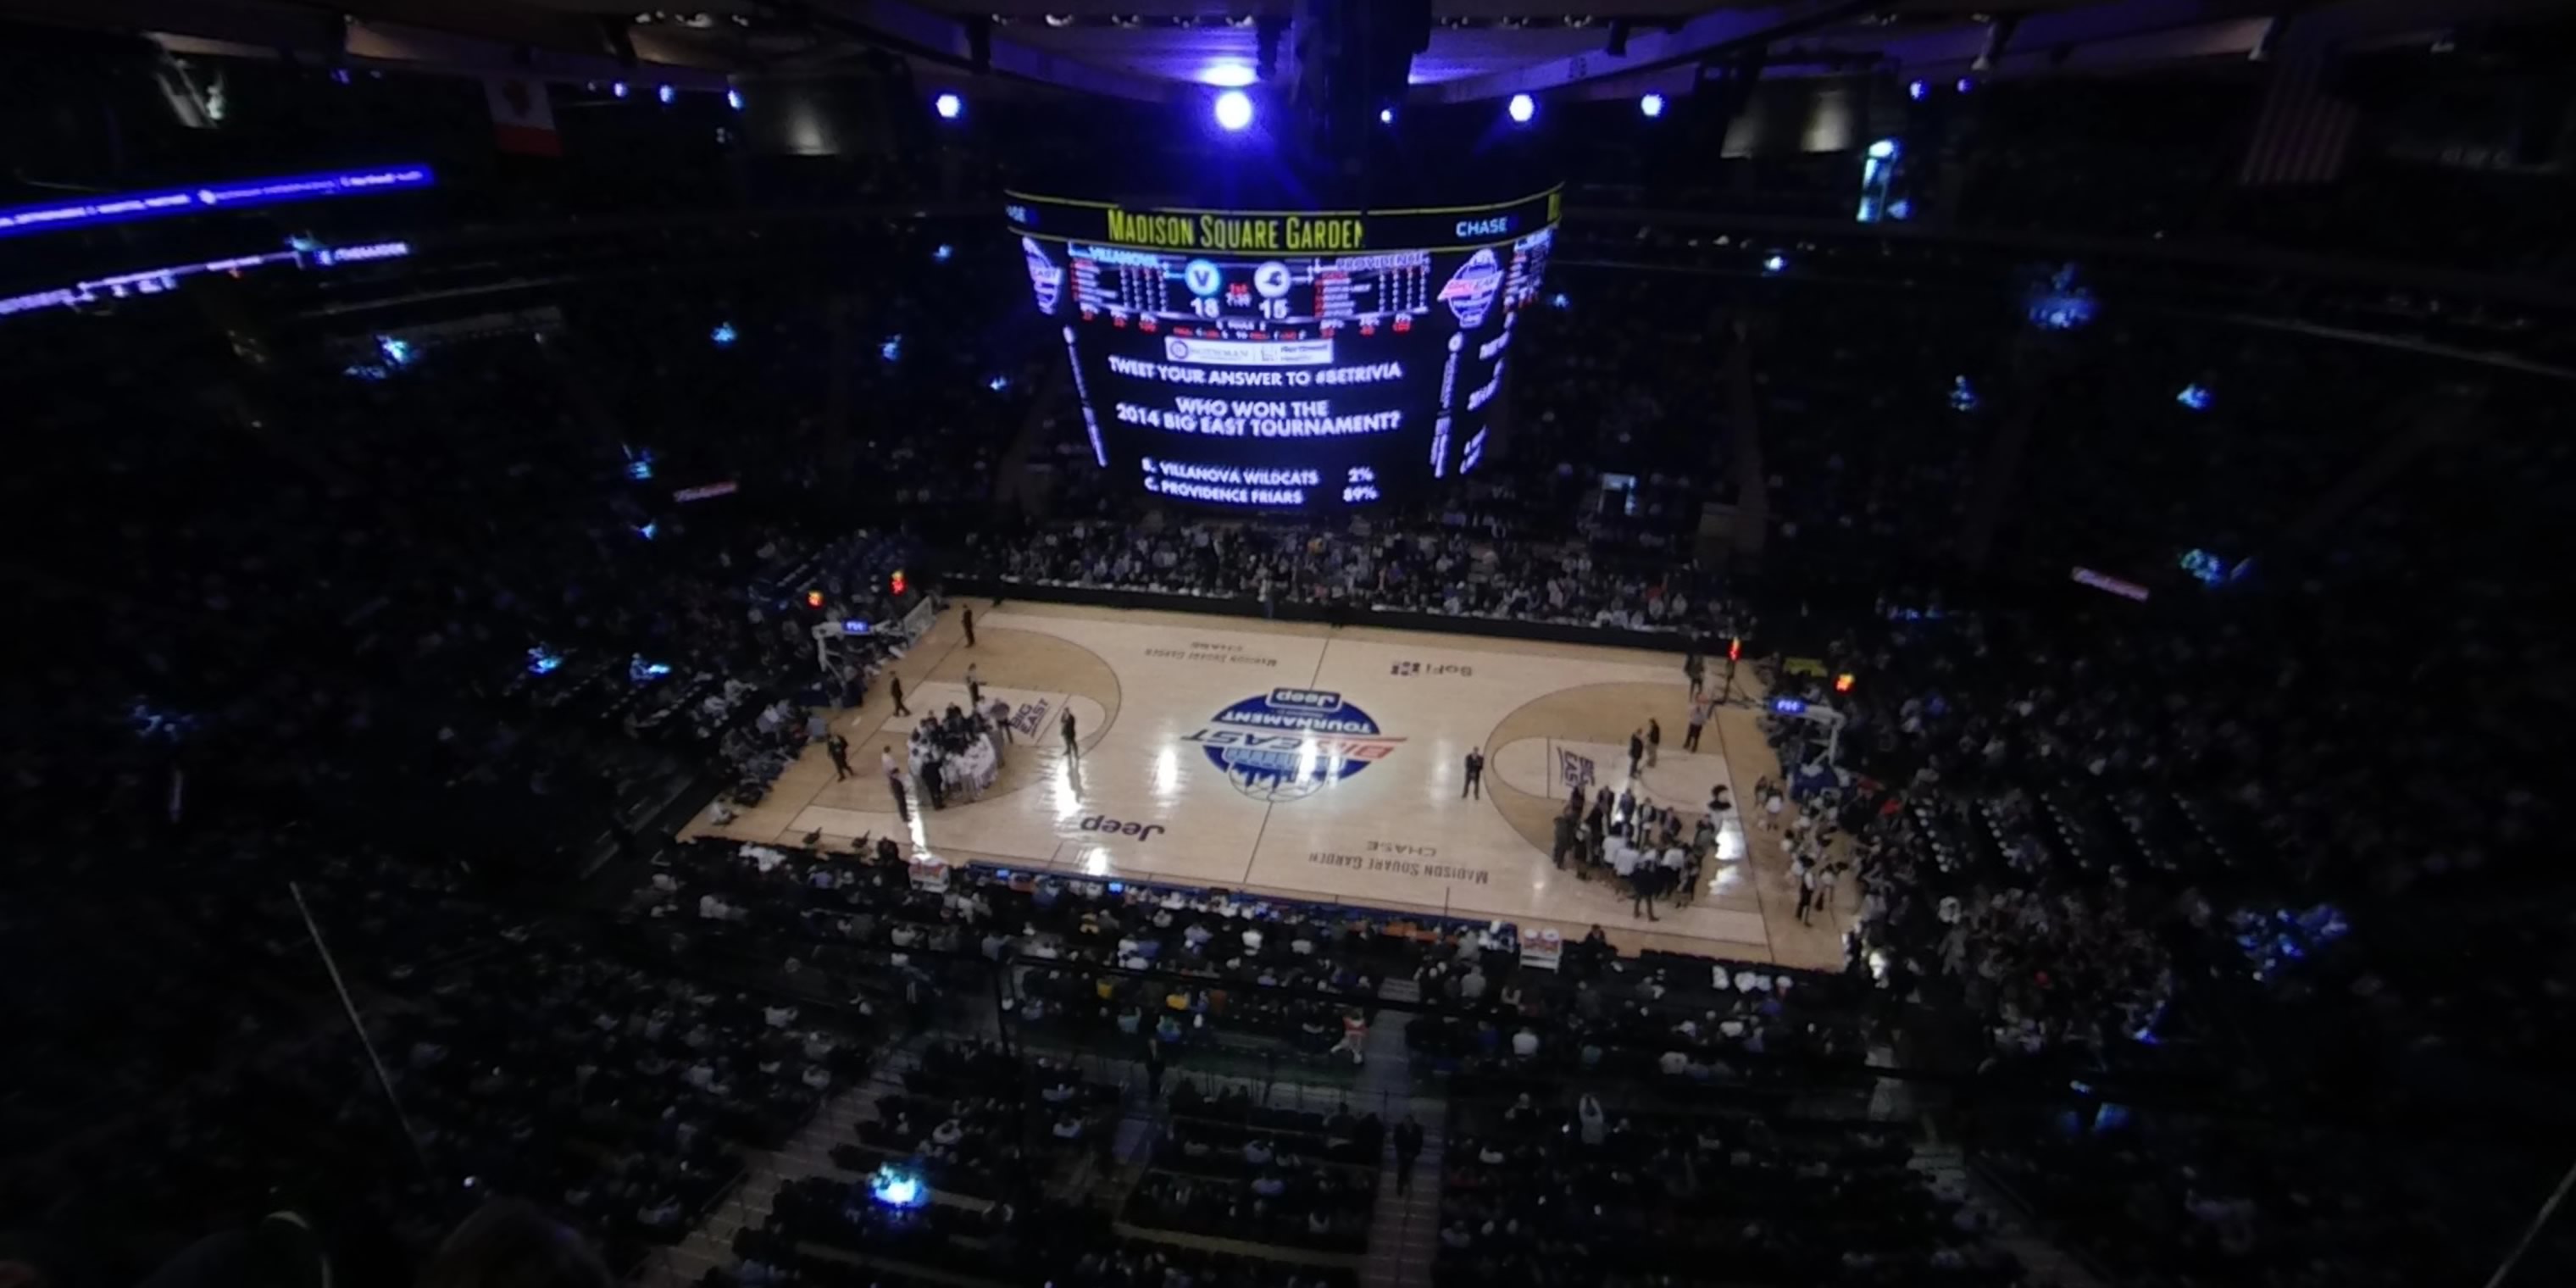 section 313 panoramic seat view  for basketball - madison square garden